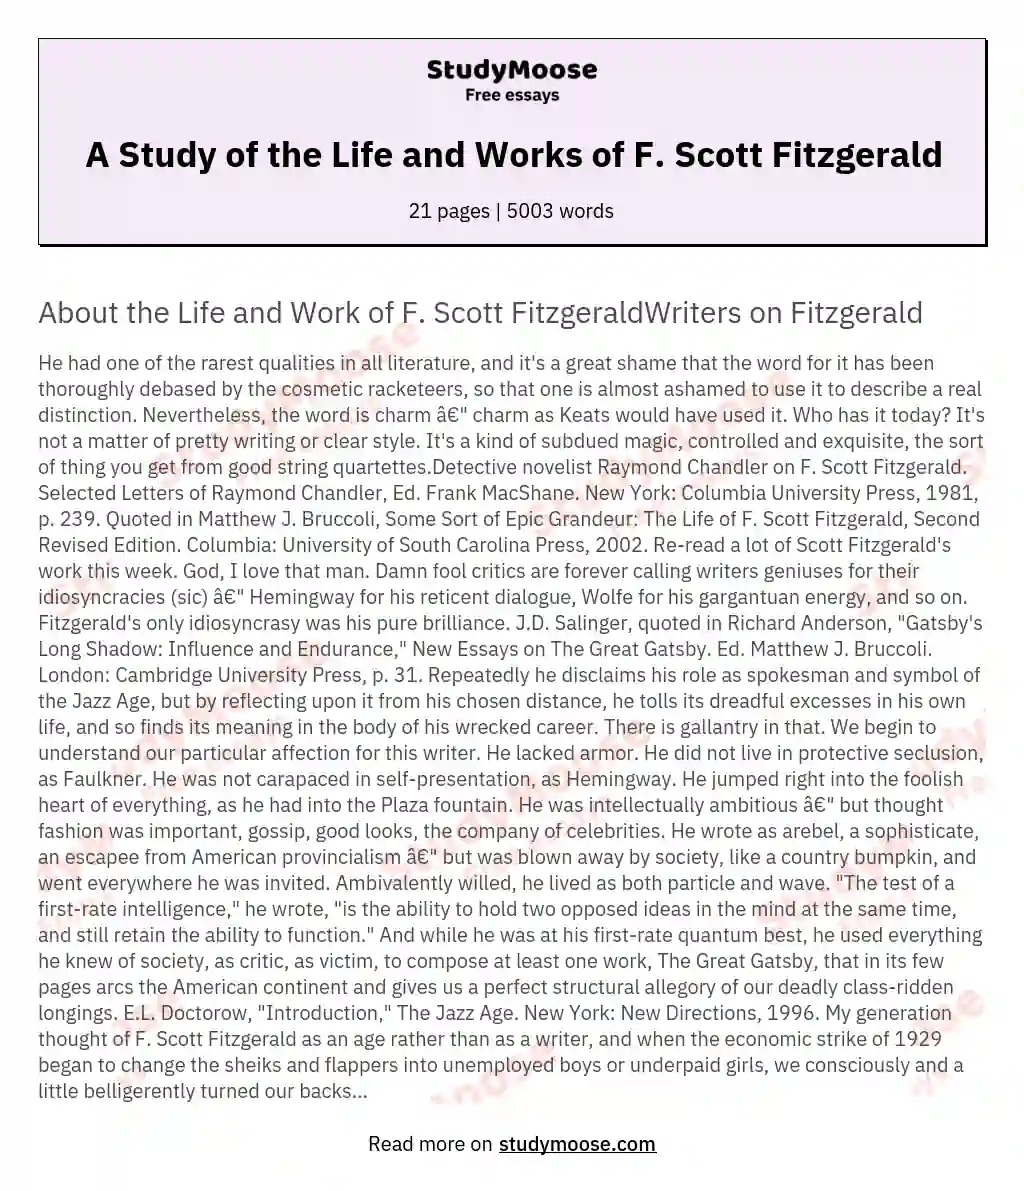 A Study of the Life and Works of F. Scott Fitzgerald essay